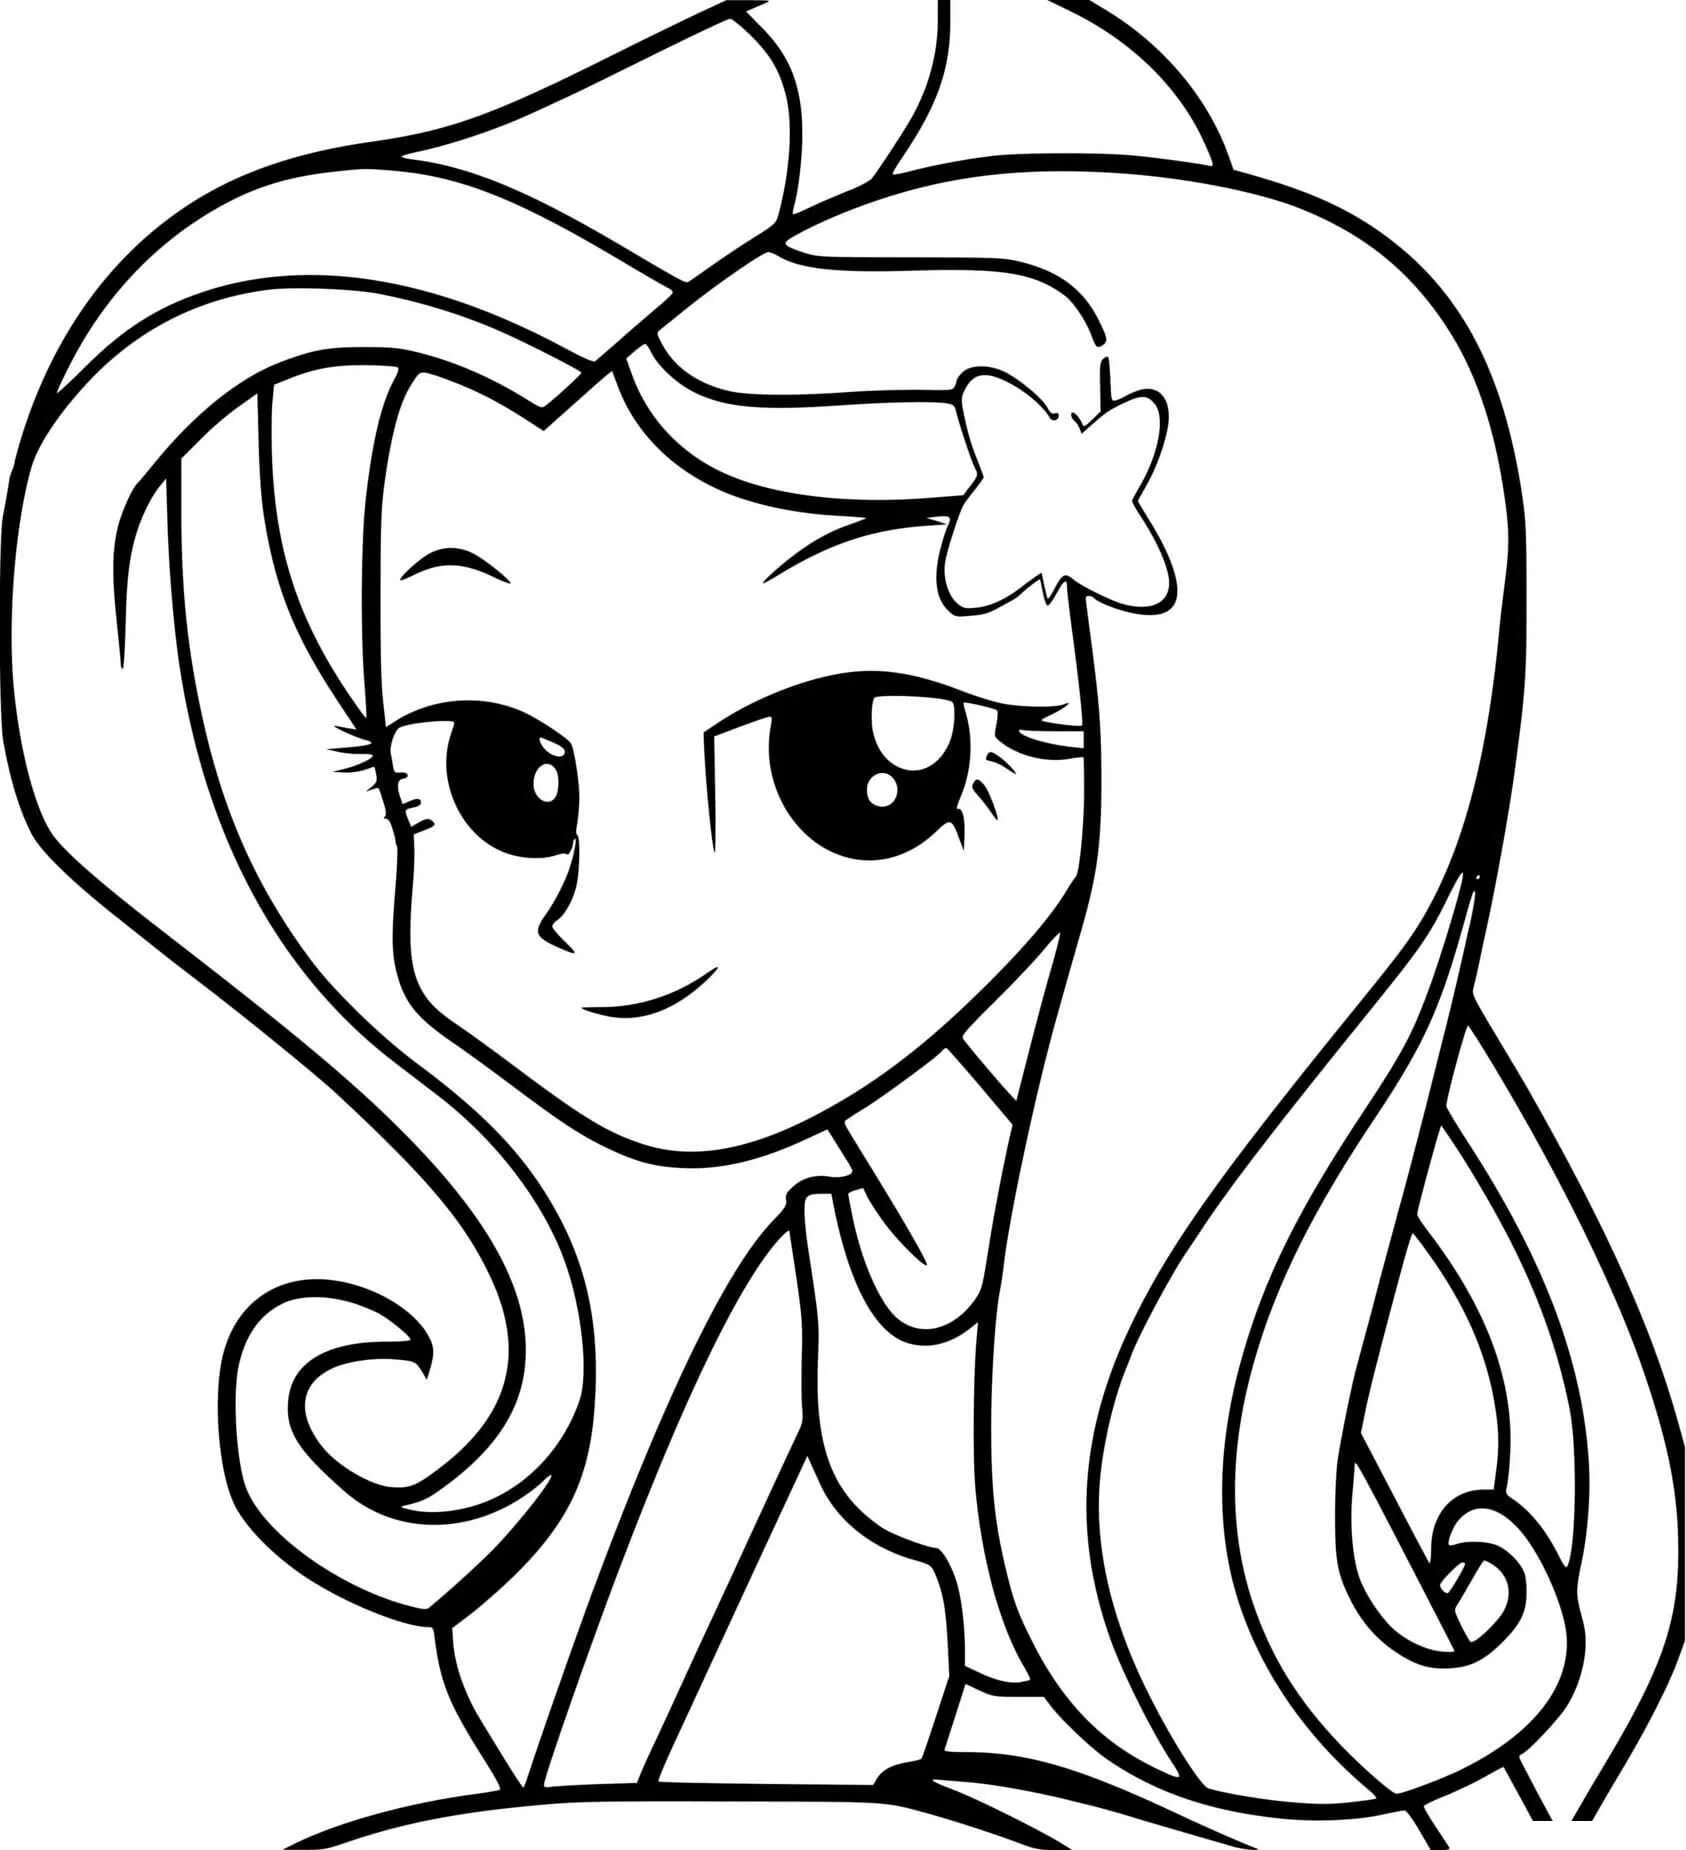 Playful fluttershy man coloring page